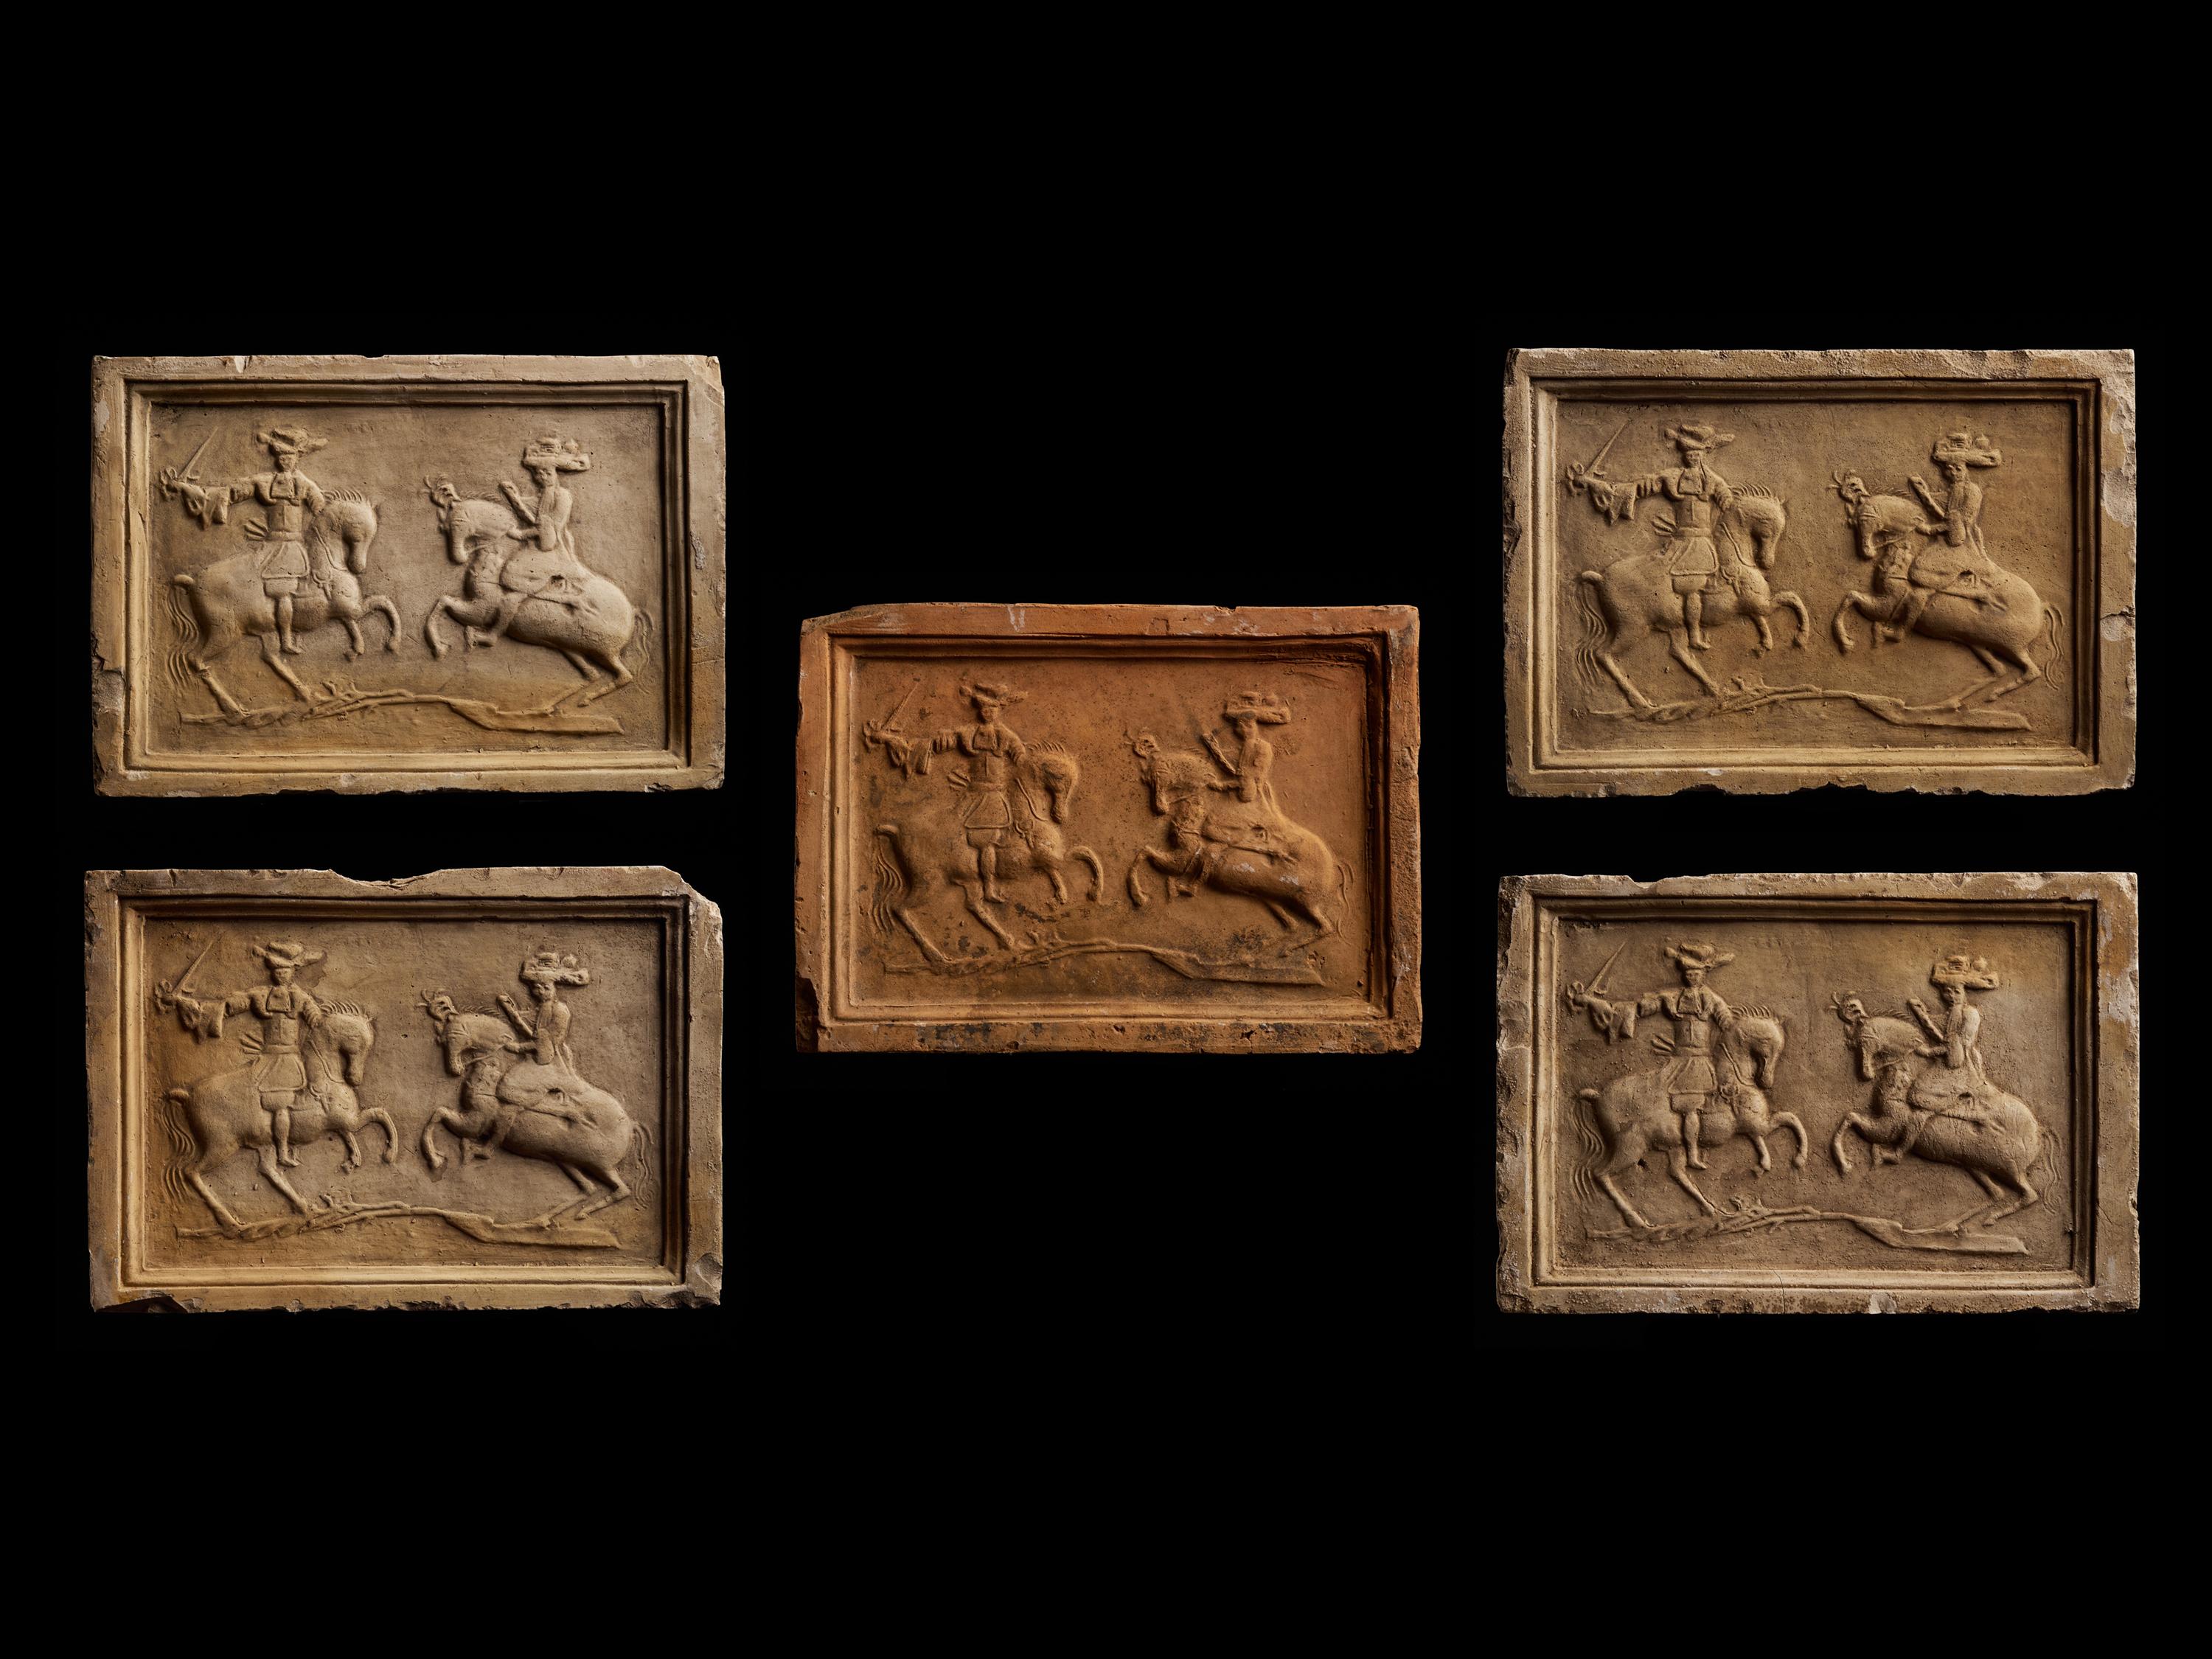 A set of 5 antique earthenware tiles with a relief of a duel with two figures on horses.